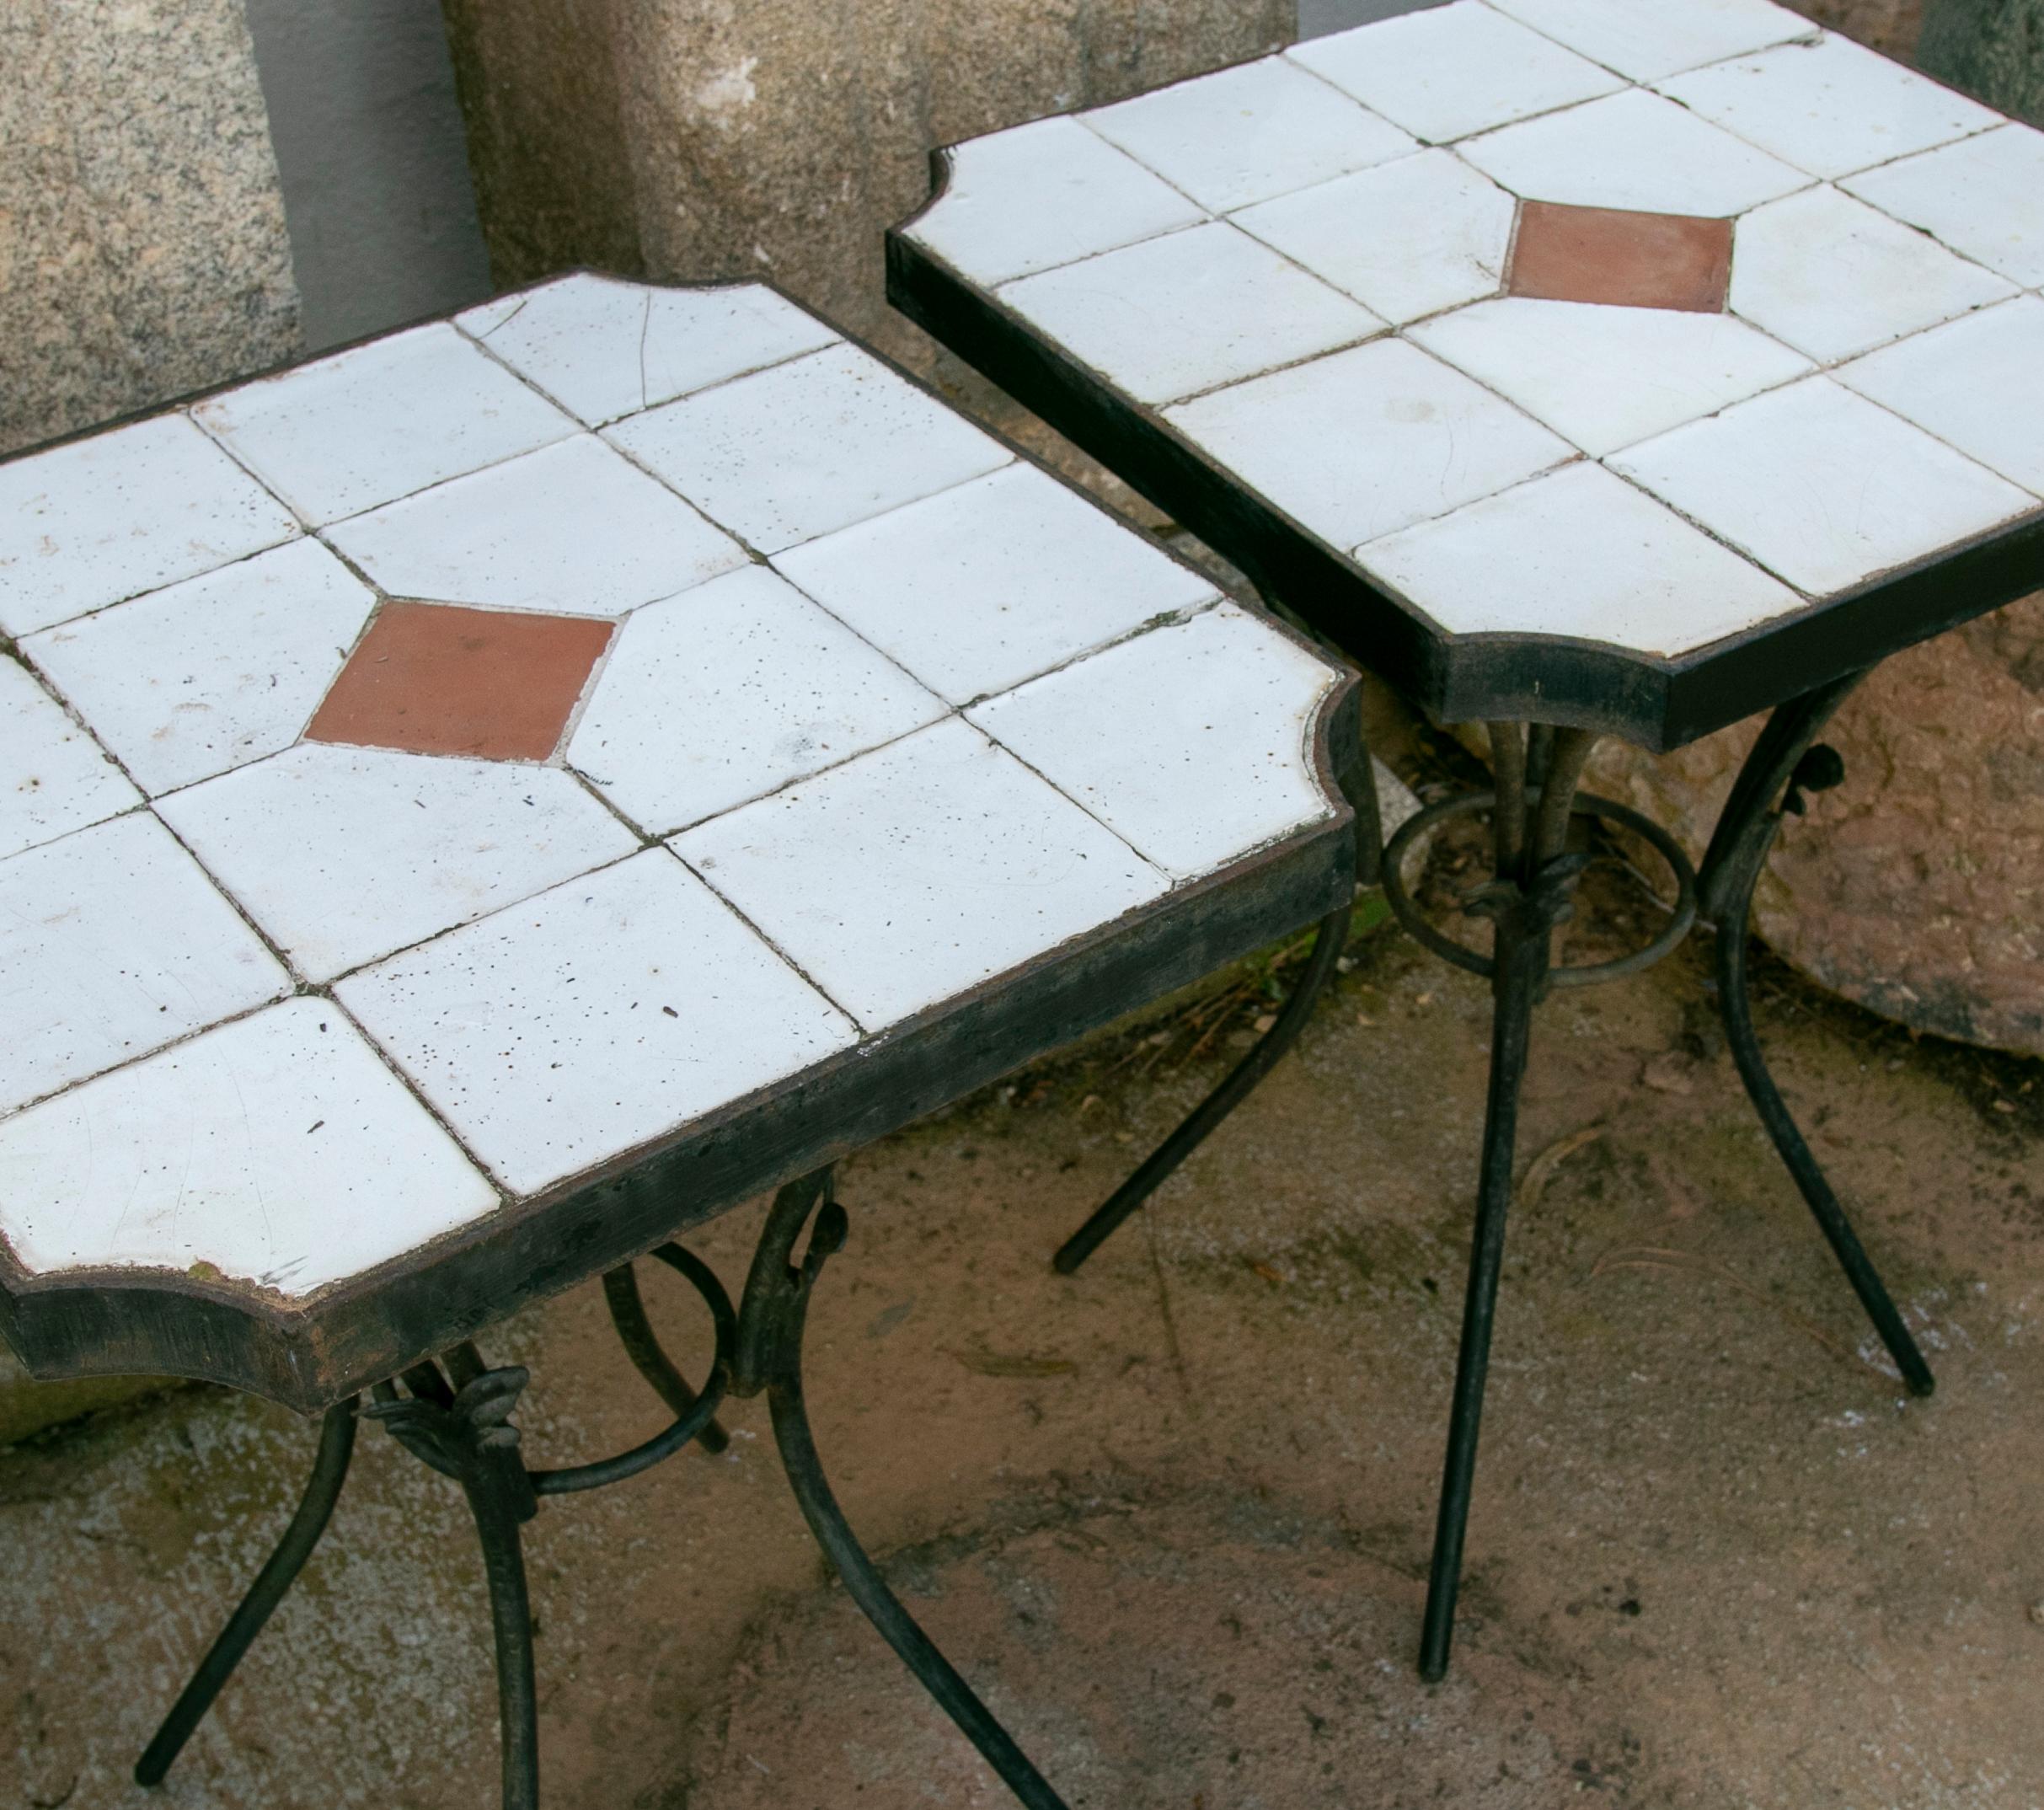 1980s Pair of Tables with Iron Base and Geometrical Tiles on Top 4